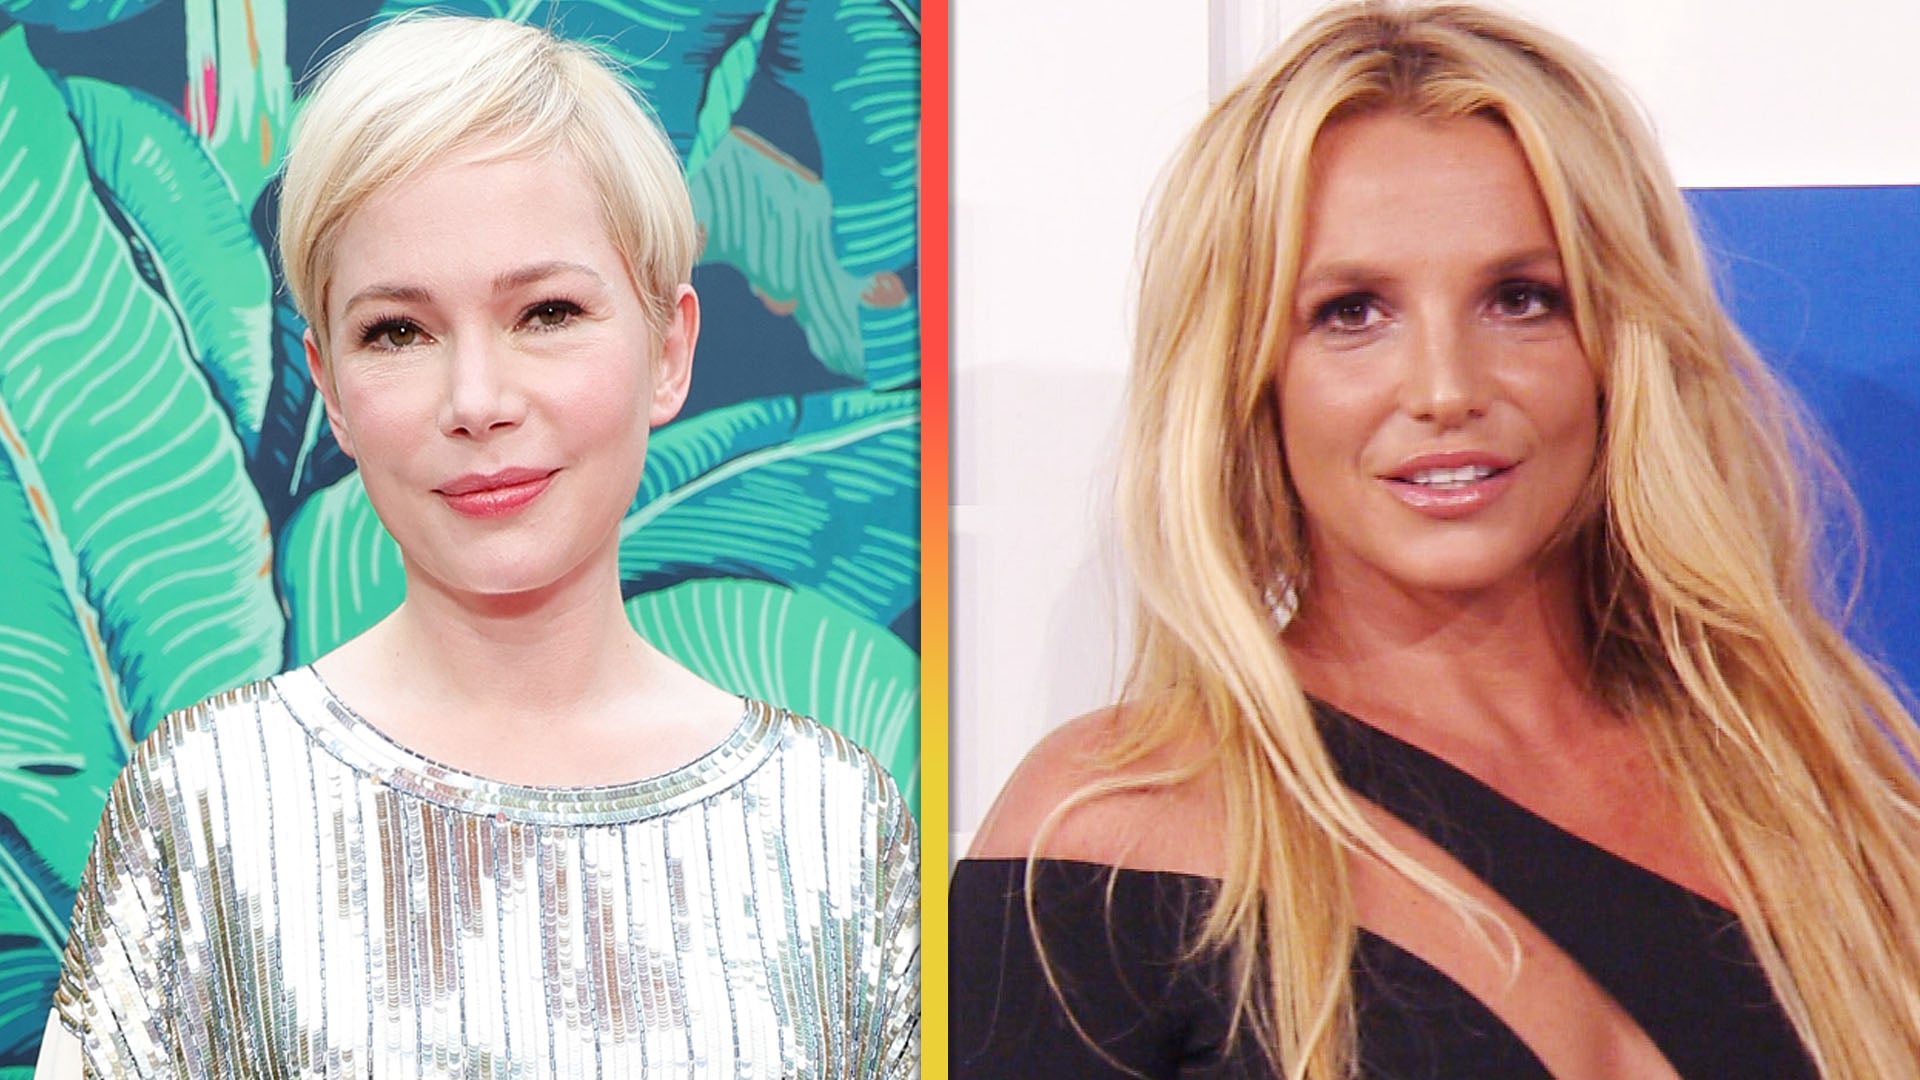 Michelle Williams' Impression of Justin Timberlake in Britney Spears’ New Memoir Goes Viral